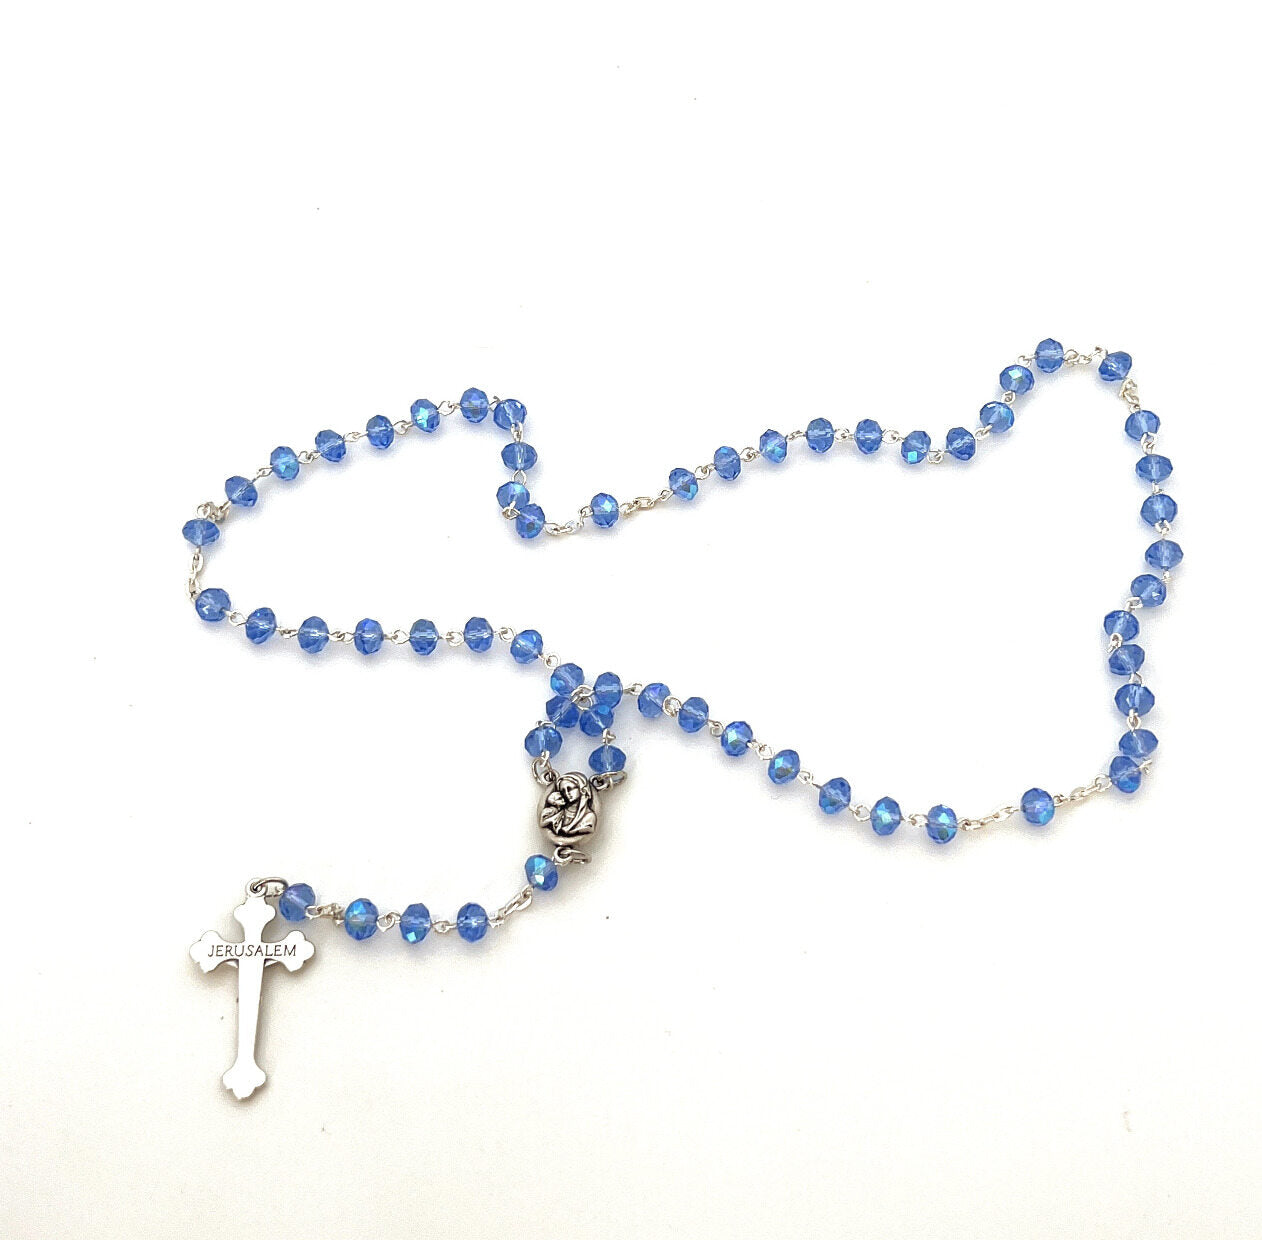 Rosary with Blue Crystal Beads, 2" Crucifix with Metal Chain, Made in Bethlehem